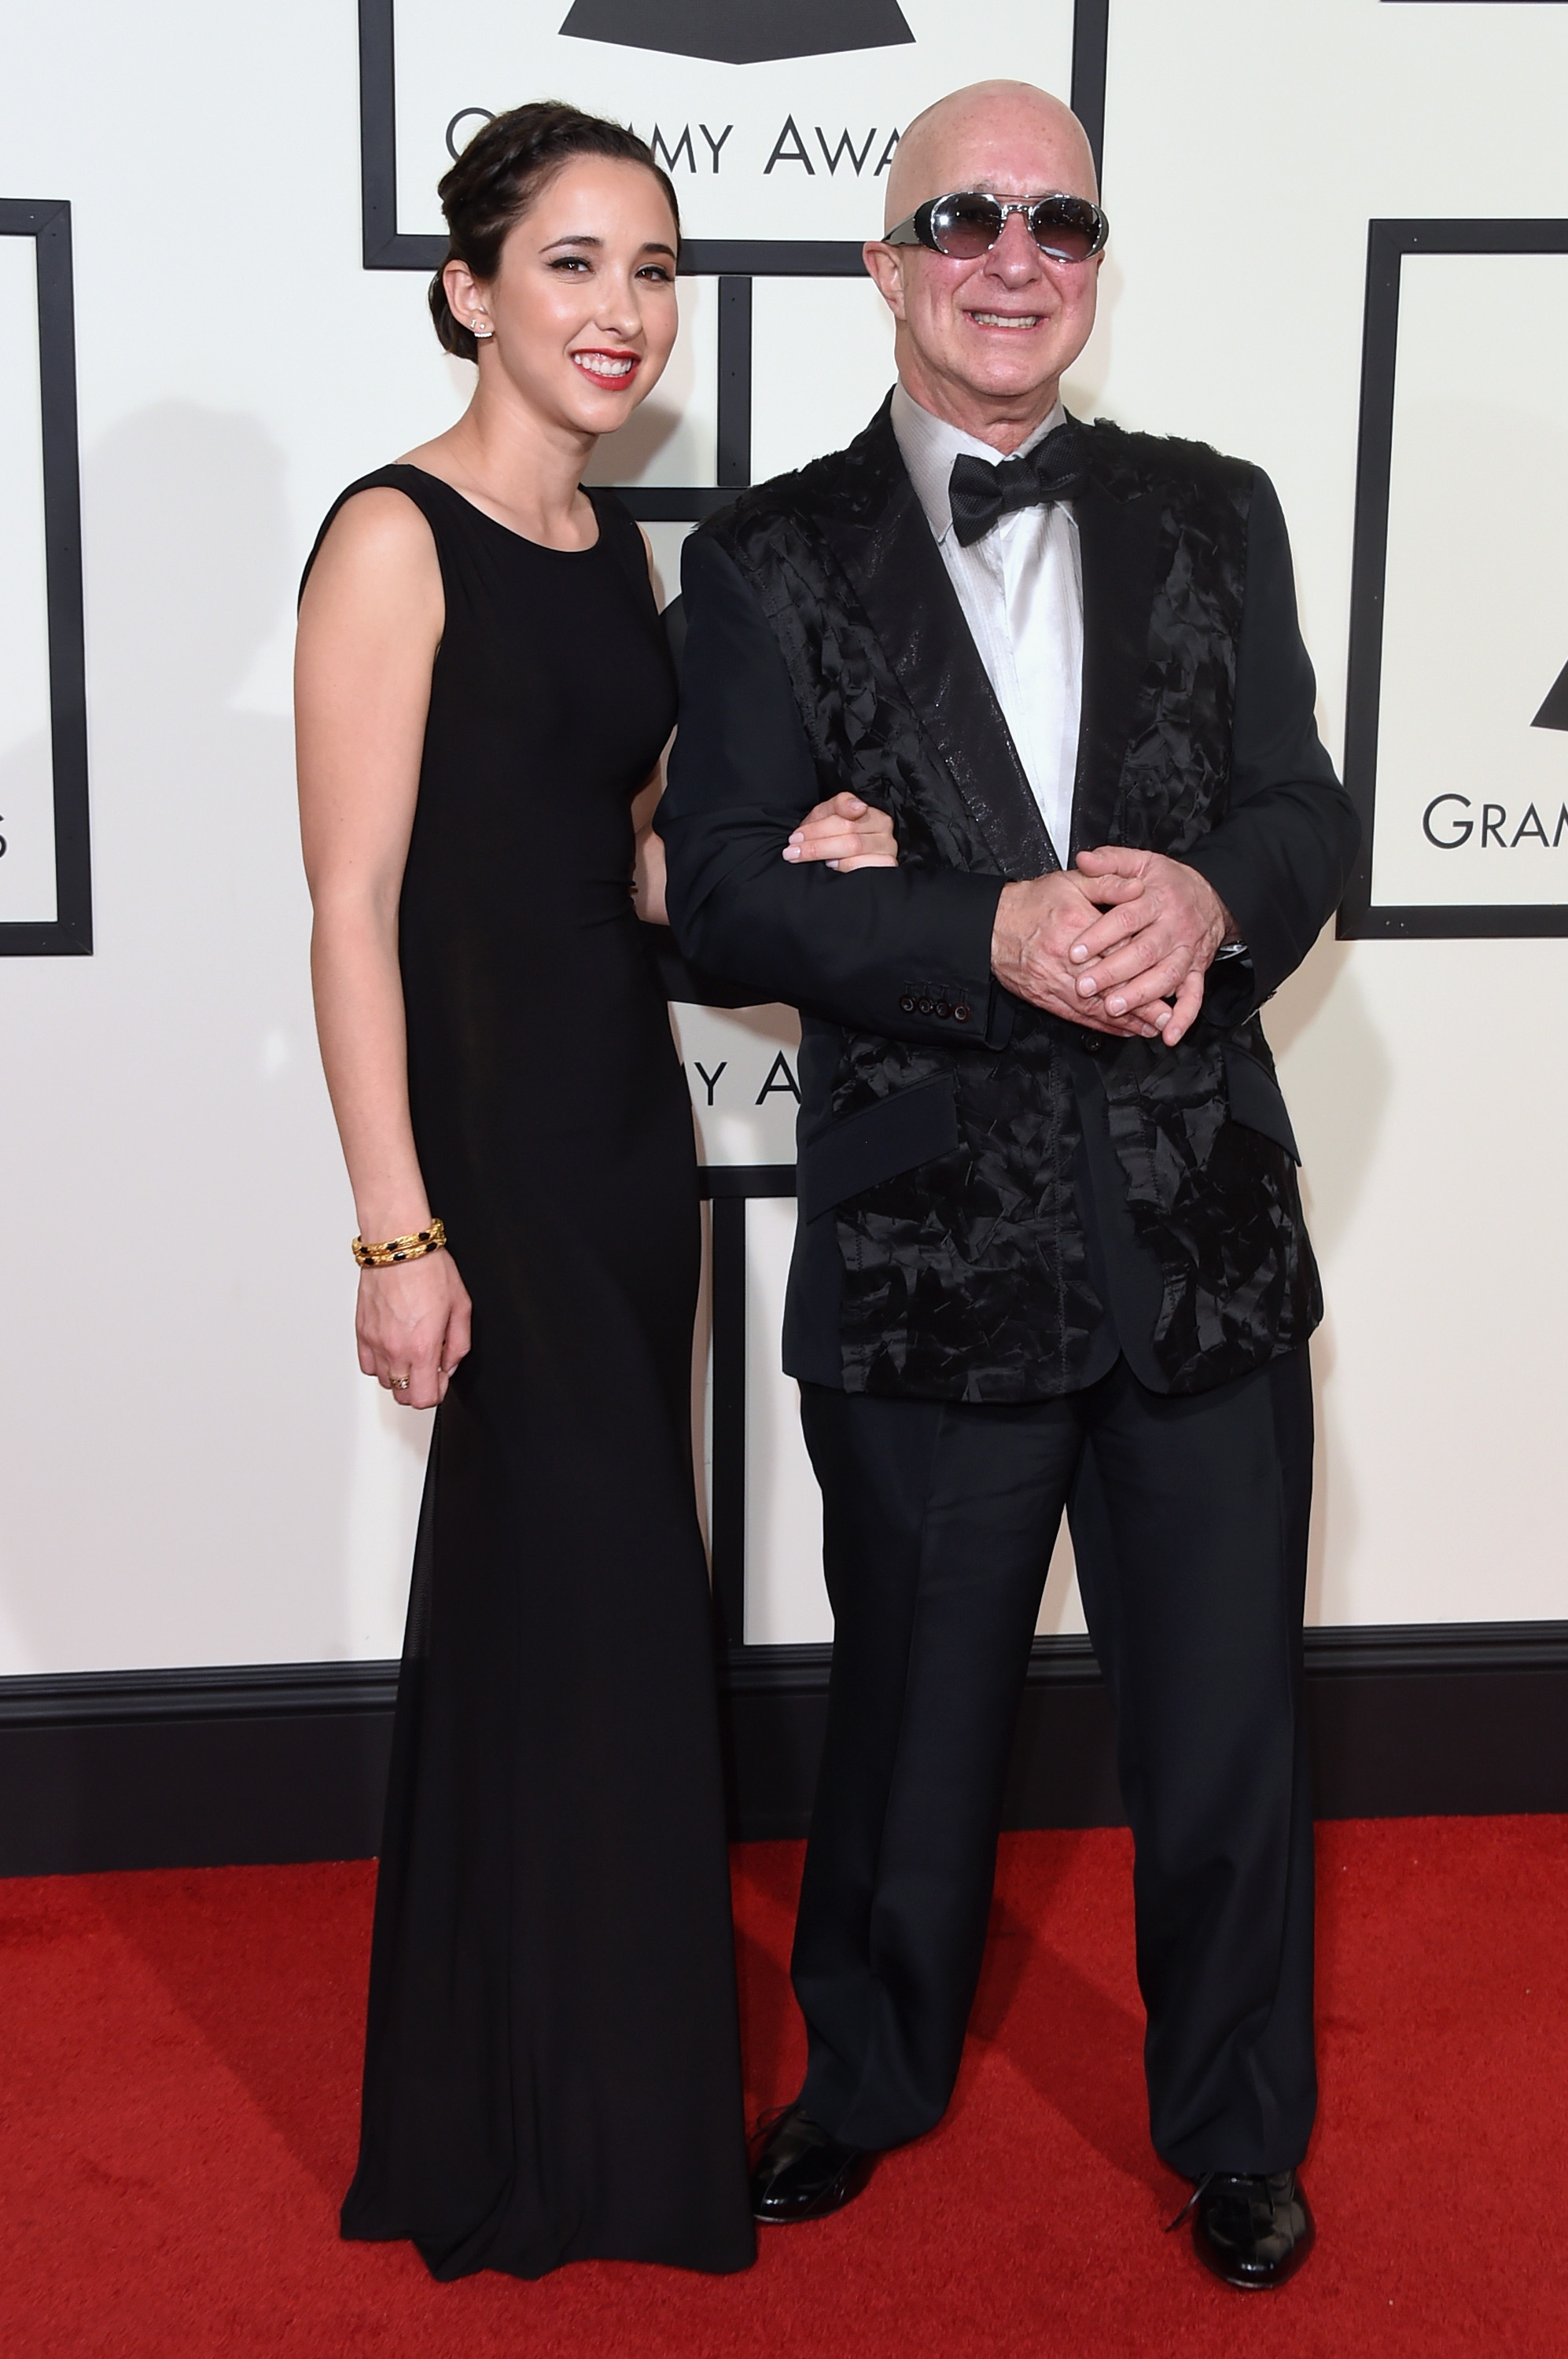 Victoria Shaffer, left, and Paul Shaffer, right, attend the 58th GRAMMY Awards at Staples Center on Feb. 15, 2016 in Los Angeles.